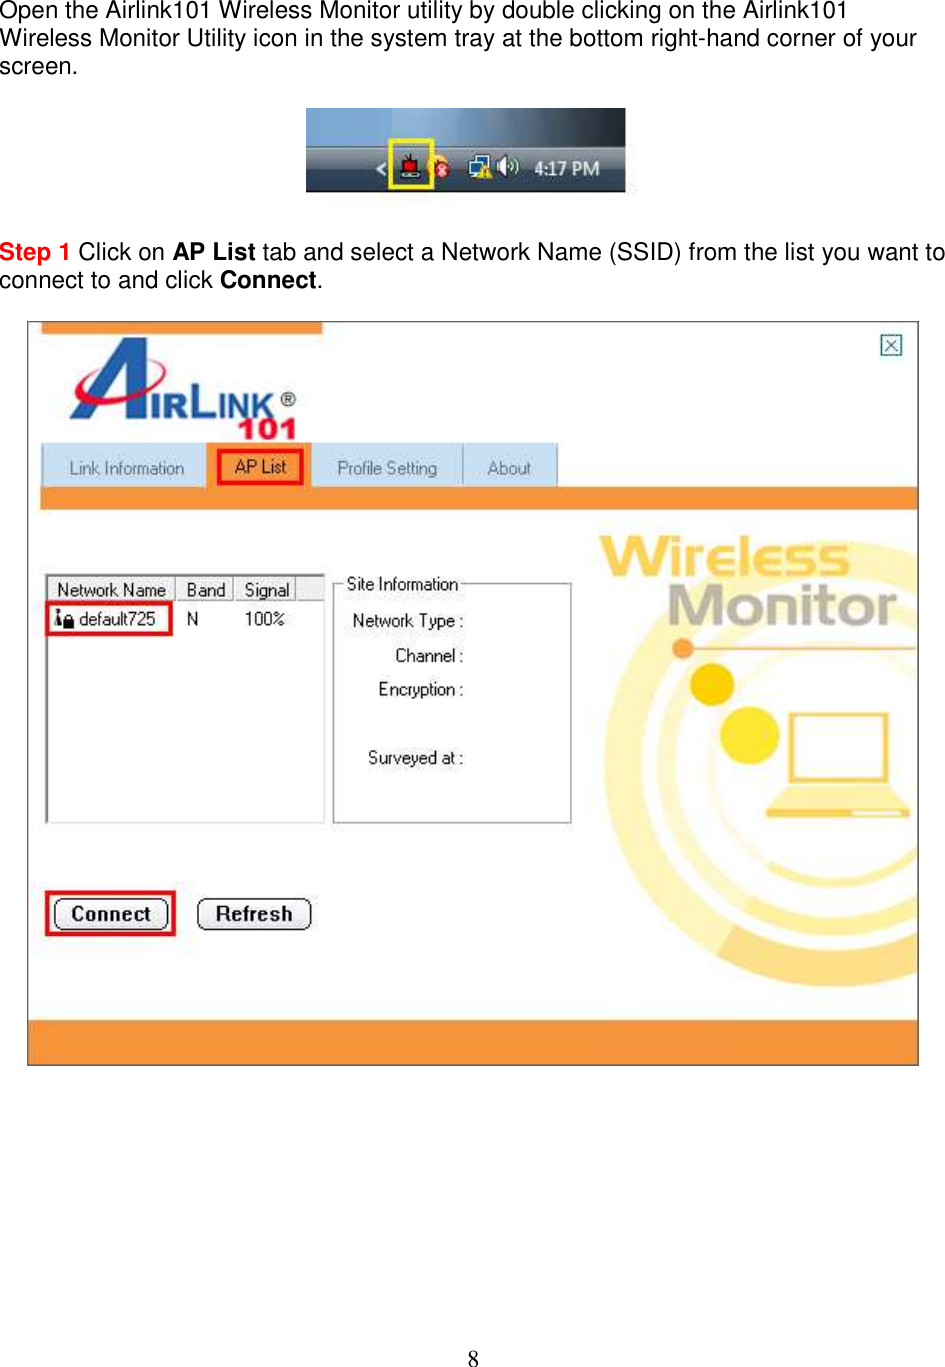 8  Open the Airlink101 Wireless Monitor utility by double clicking on the Airlink101 Wireless Monitor Utility icon in the system tray at the bottom right-hand corner of your screen.    Step 1 Click on AP List tab and select a Network Name (SSID) from the list you want to connect to and click Connect.            